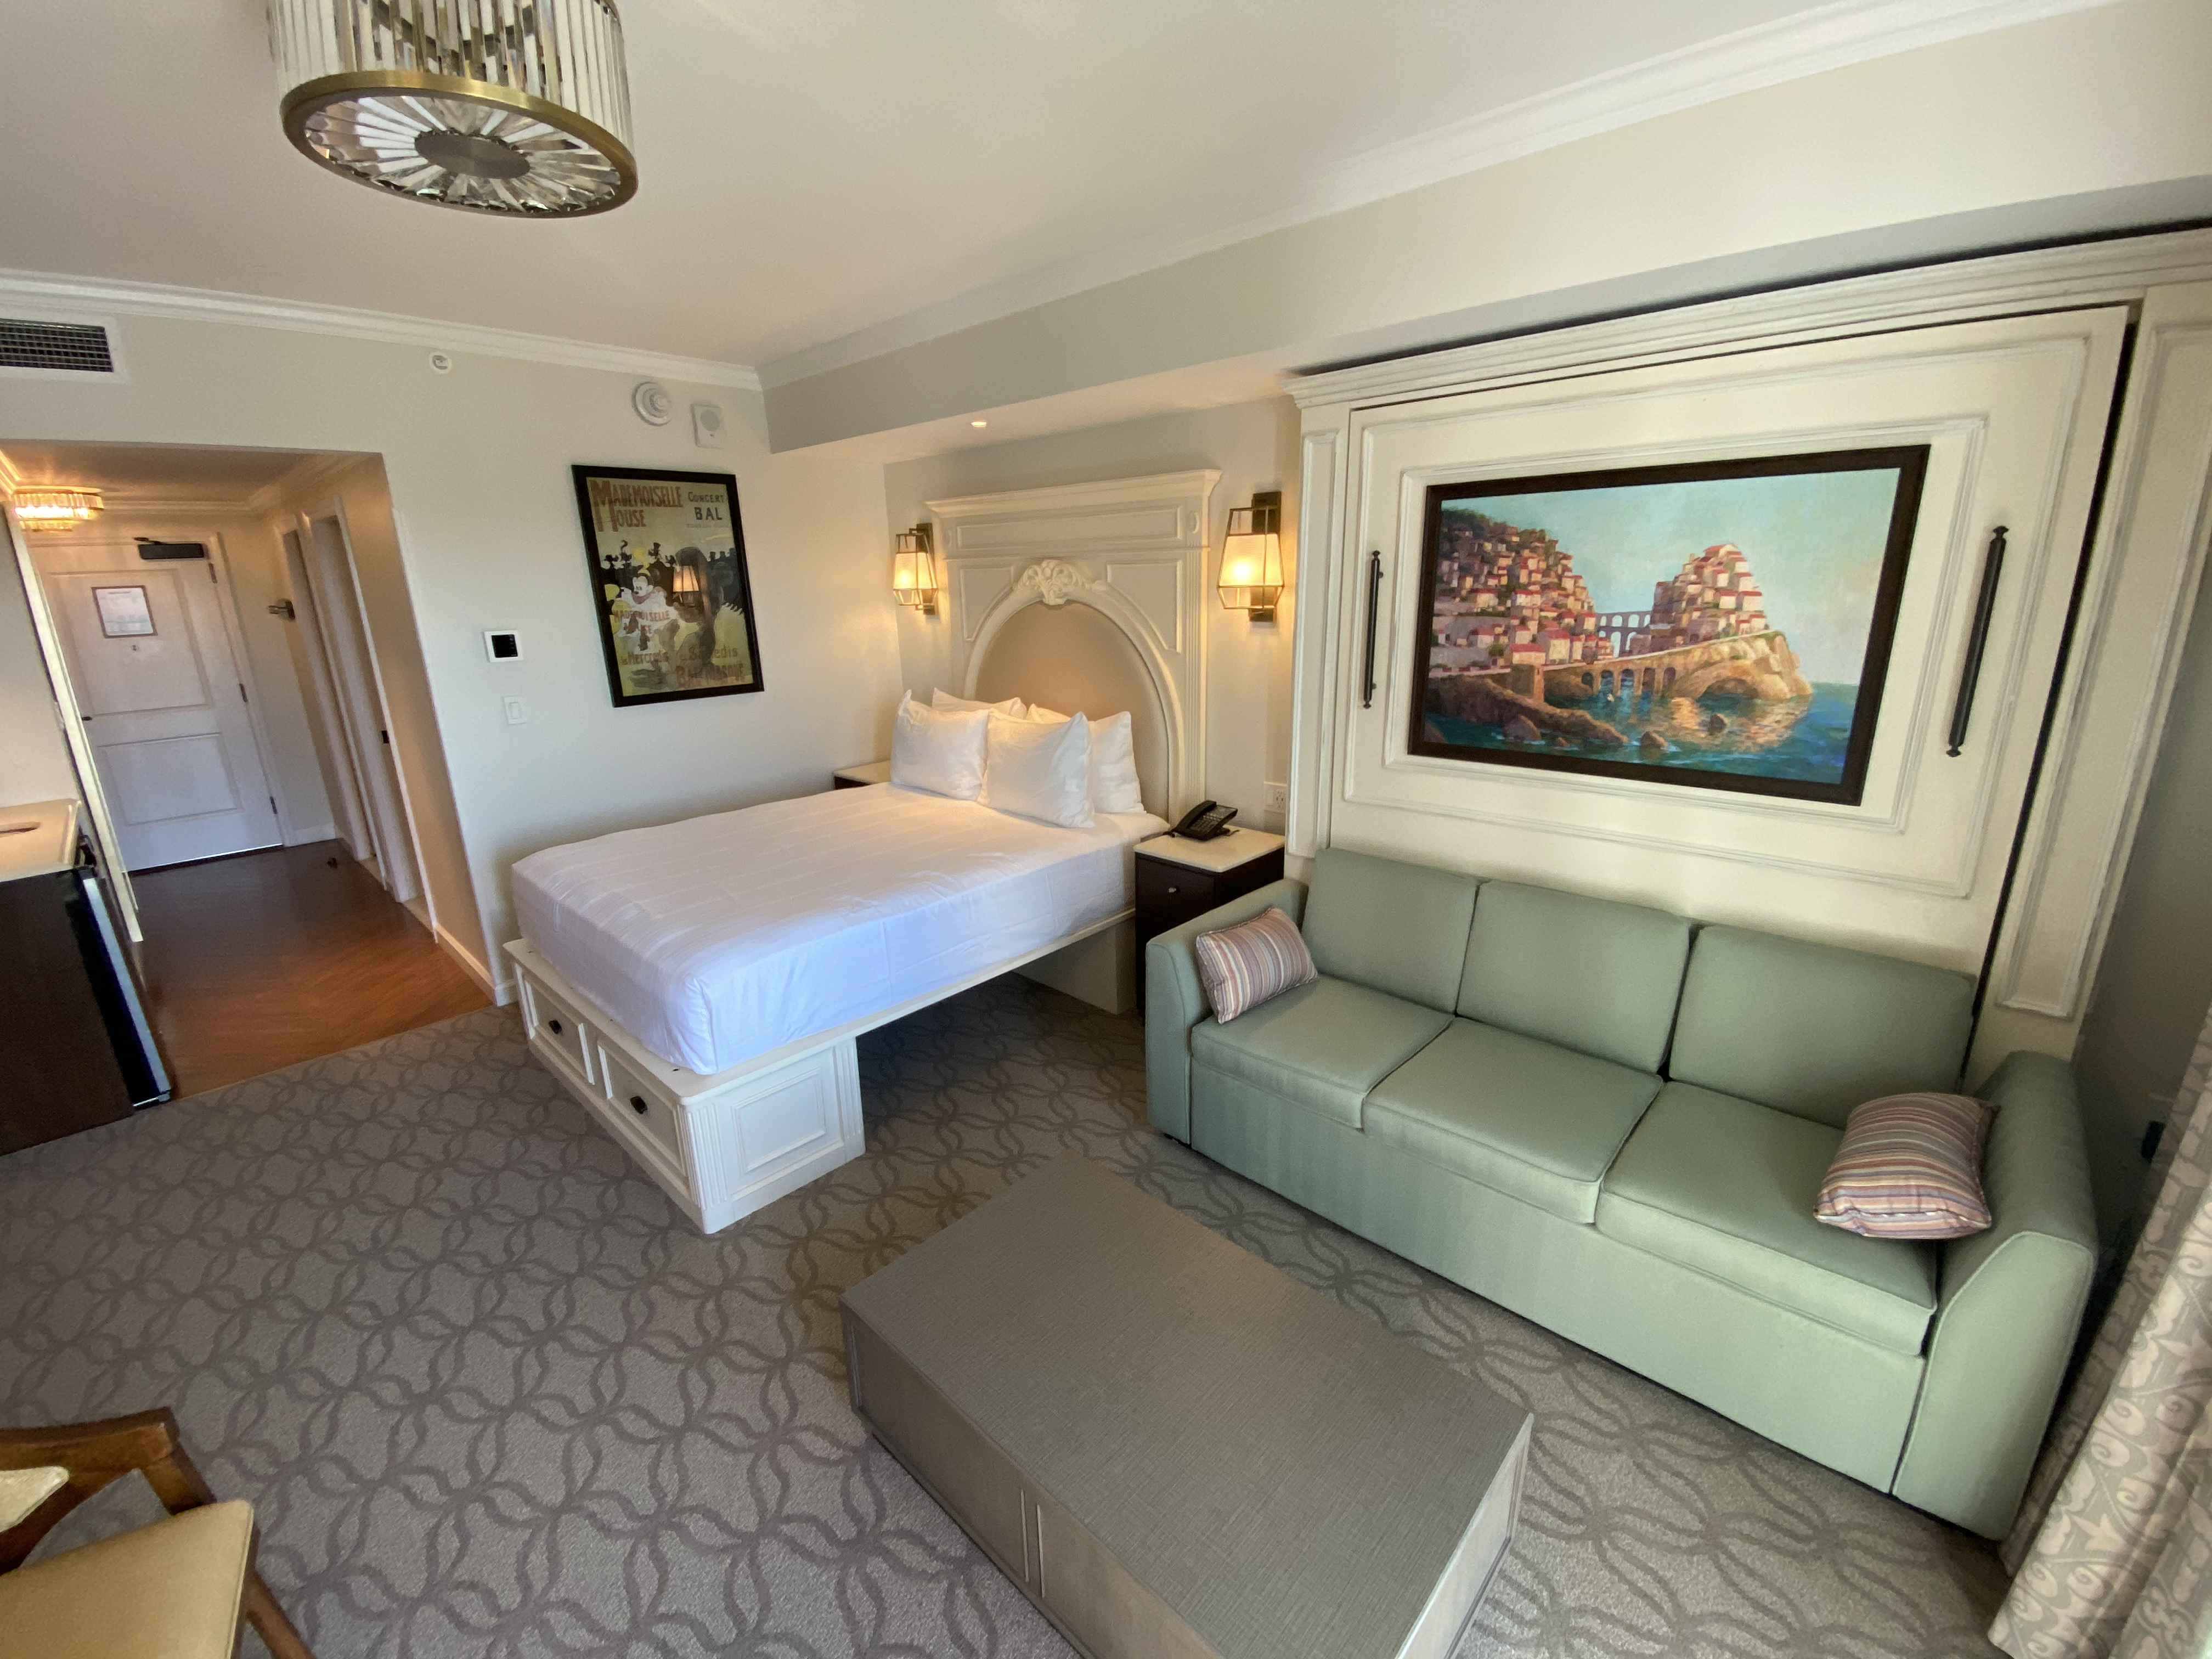 Photos Video Review Tour A Preferred View Deluxe Studio Villa At Disney S Riviera Resort In Walt Disney World Wdw News Today